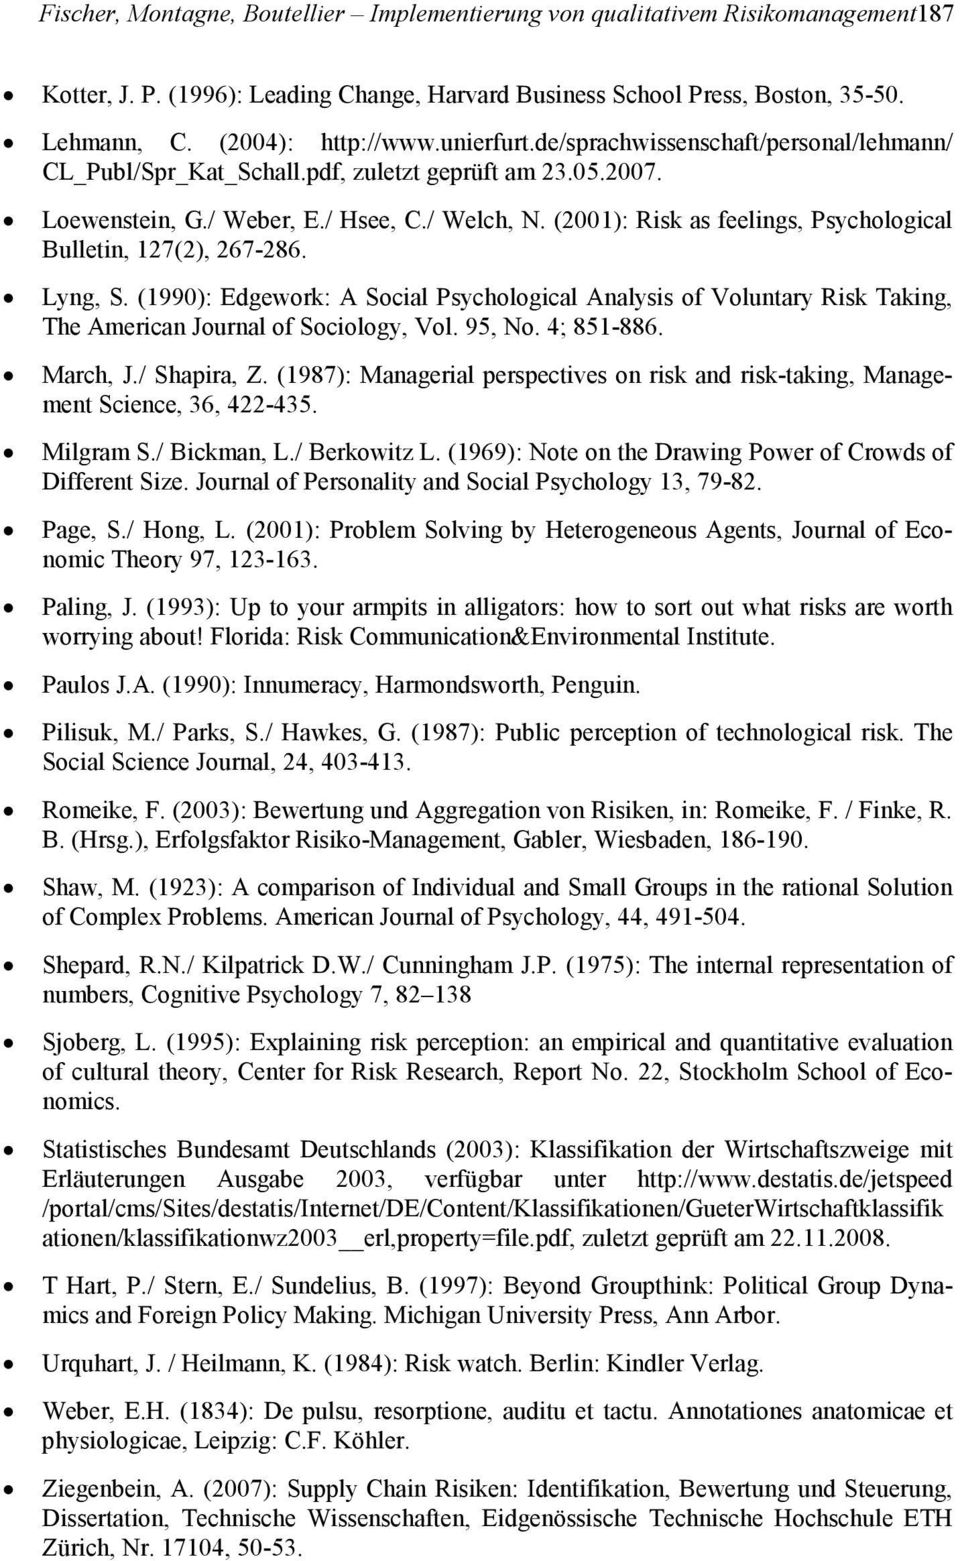 (2001): Risk as feelings, Psychological Bulletin, 127(2), 267-286. Lyng, S. (1990): Edgework: A Social Psychological Analysis of Voluntary Risk Taking, The American Journal of Sociology, Vol. 95, No.